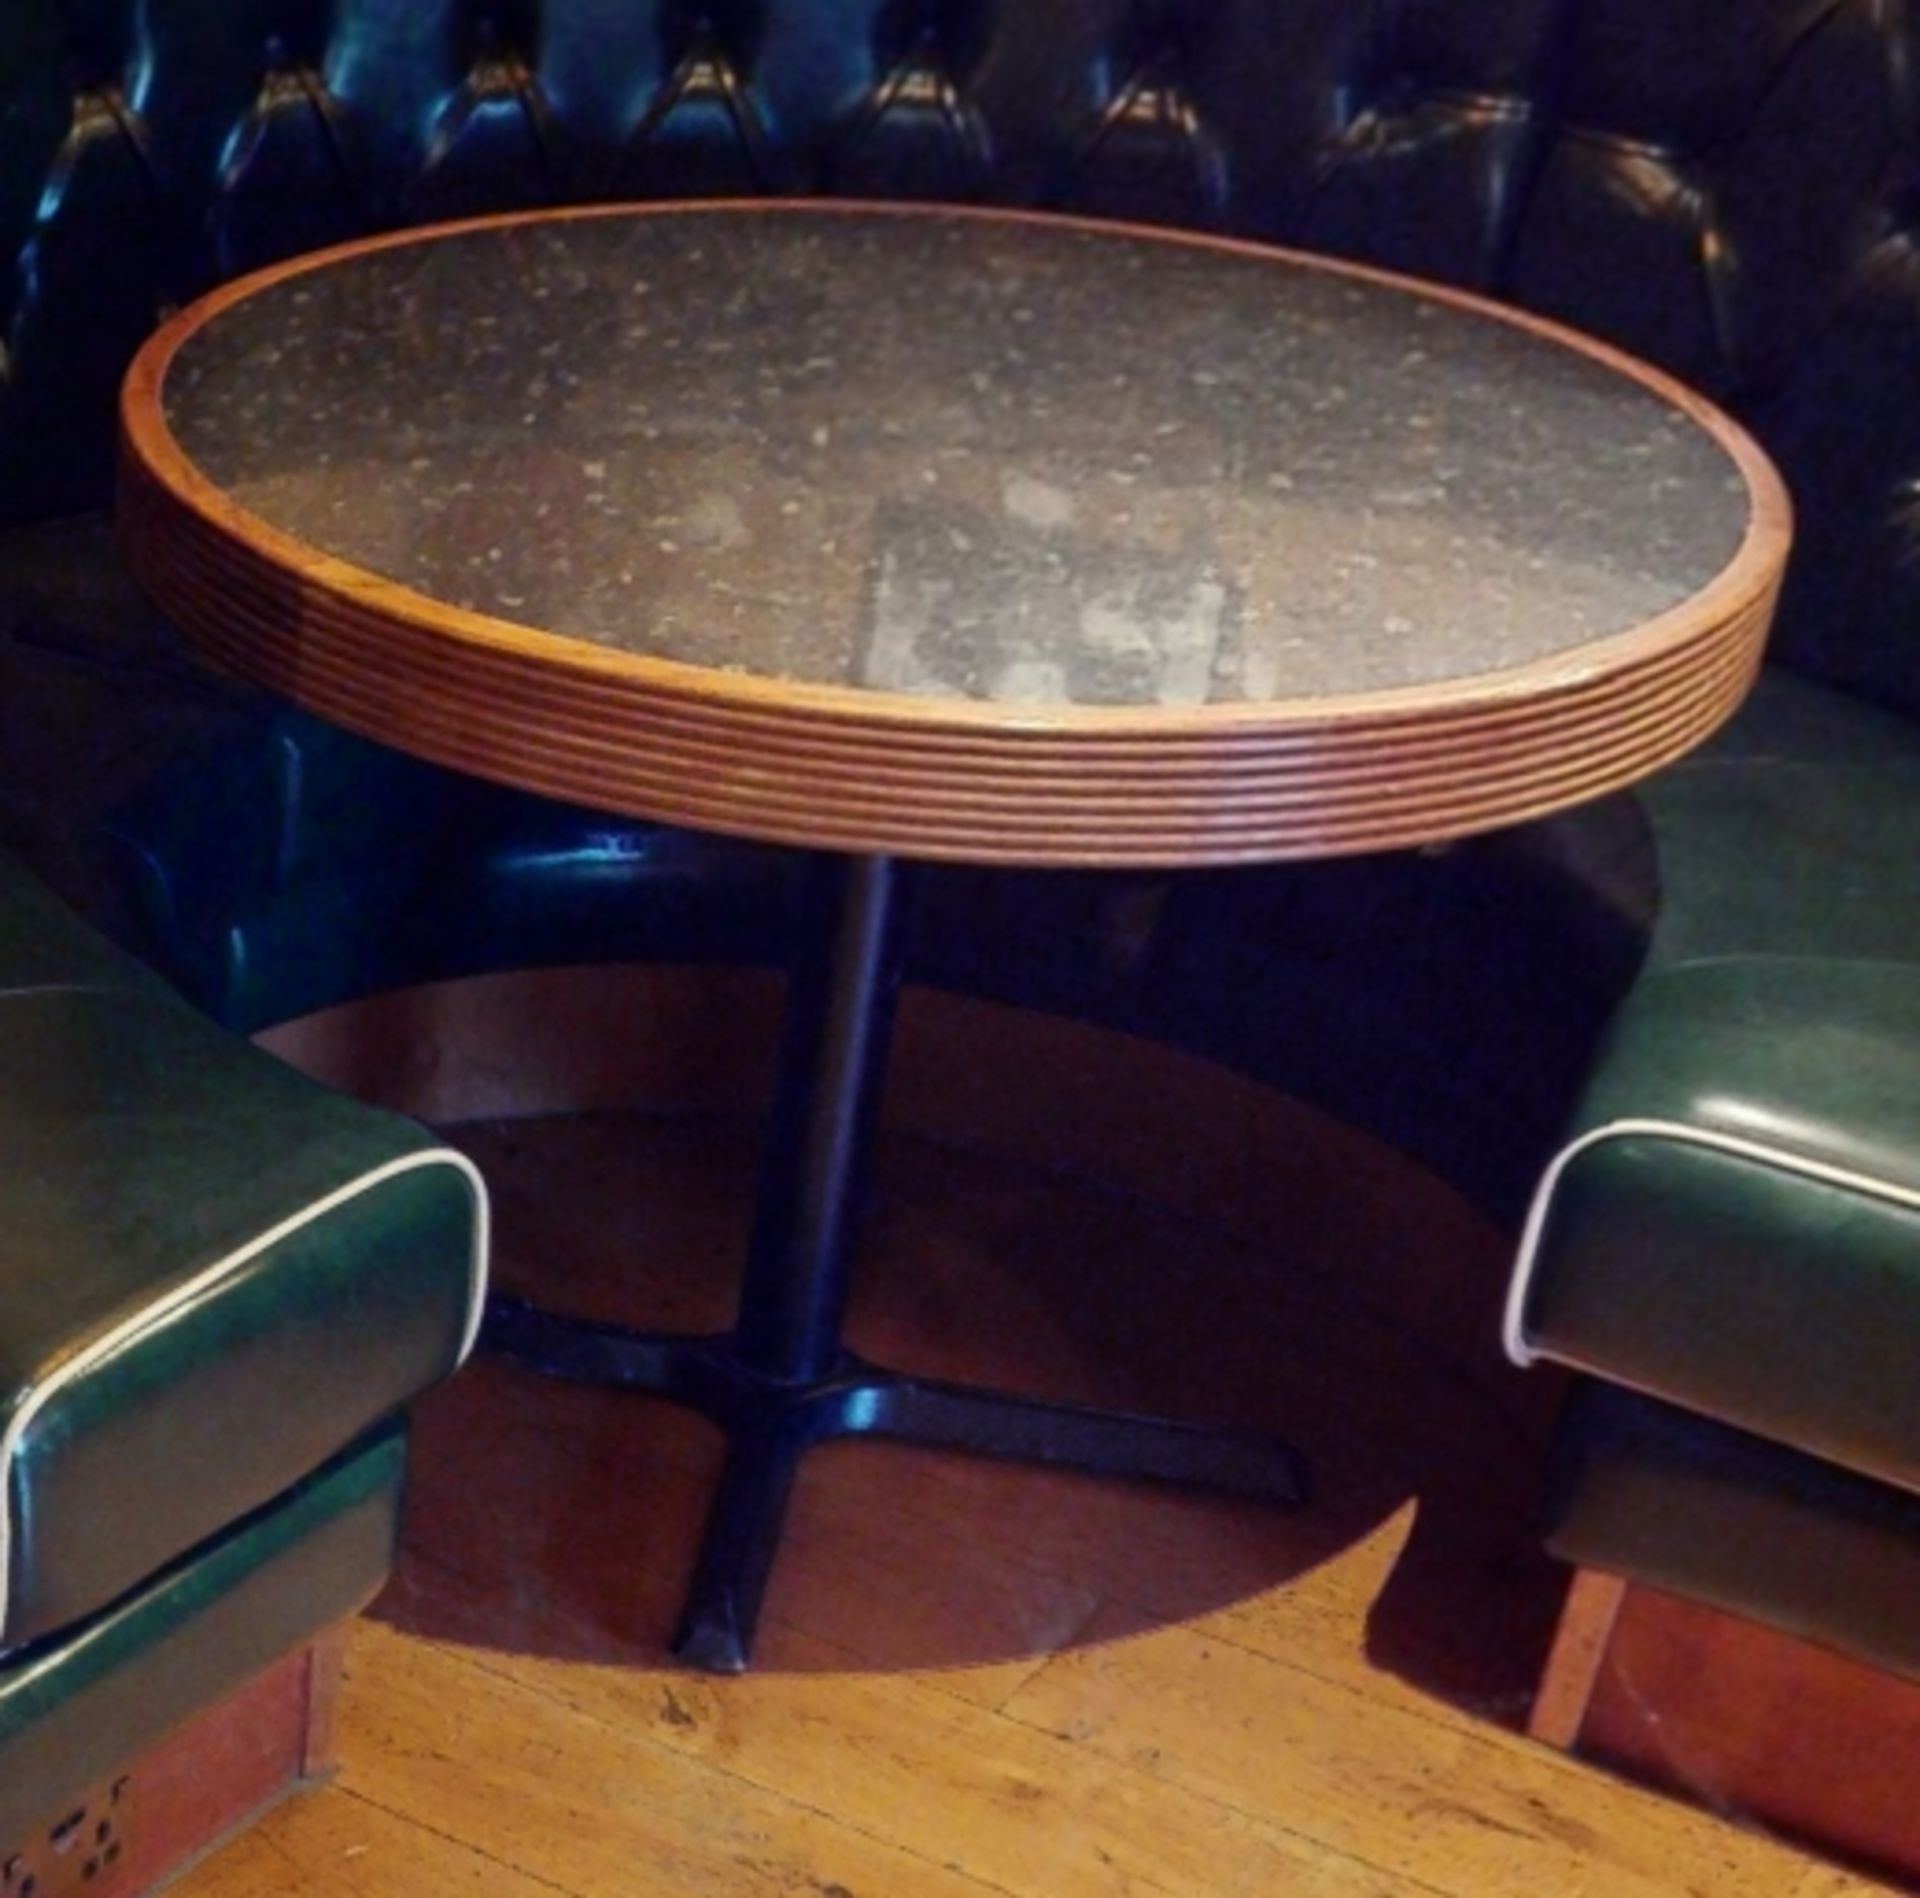 6 x Assorted Restaurant Dining Tables With Granite Style Surface, Wooden Edging and Cast Iron - Image 6 of 6